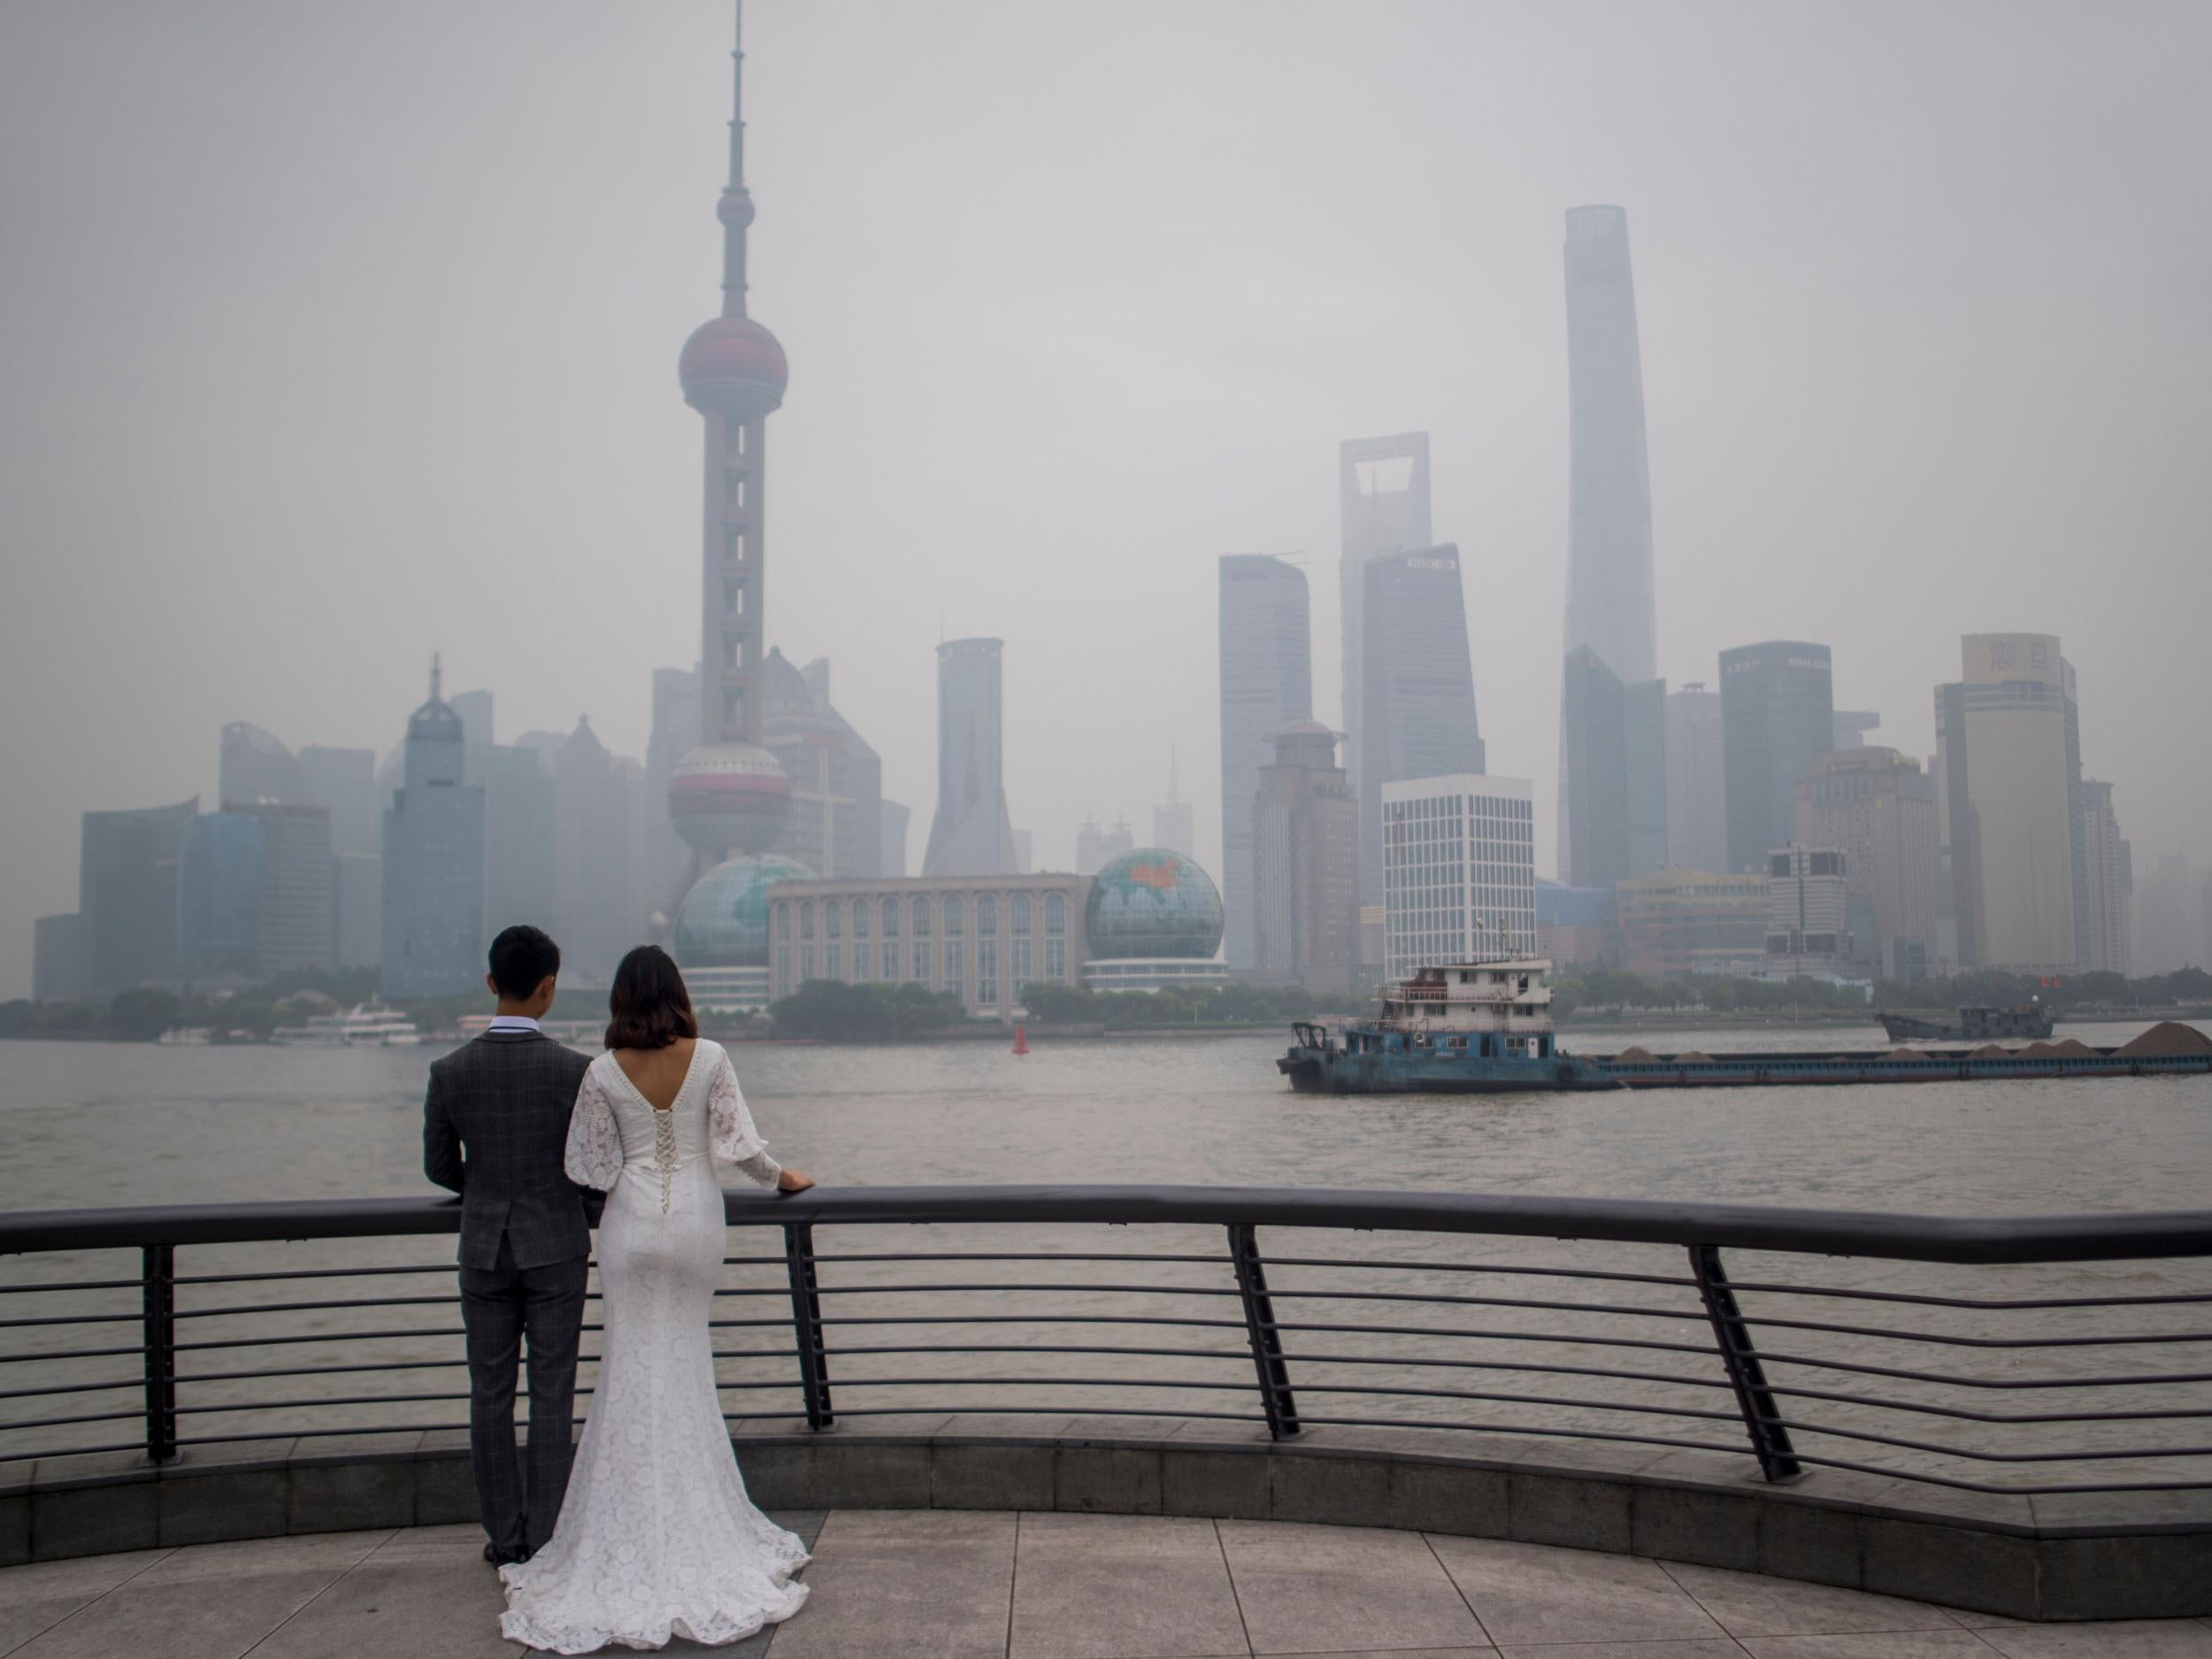 Hong Kong Woman Tricked Into Marrying Total Stranger During Job Interview The Independent 8451